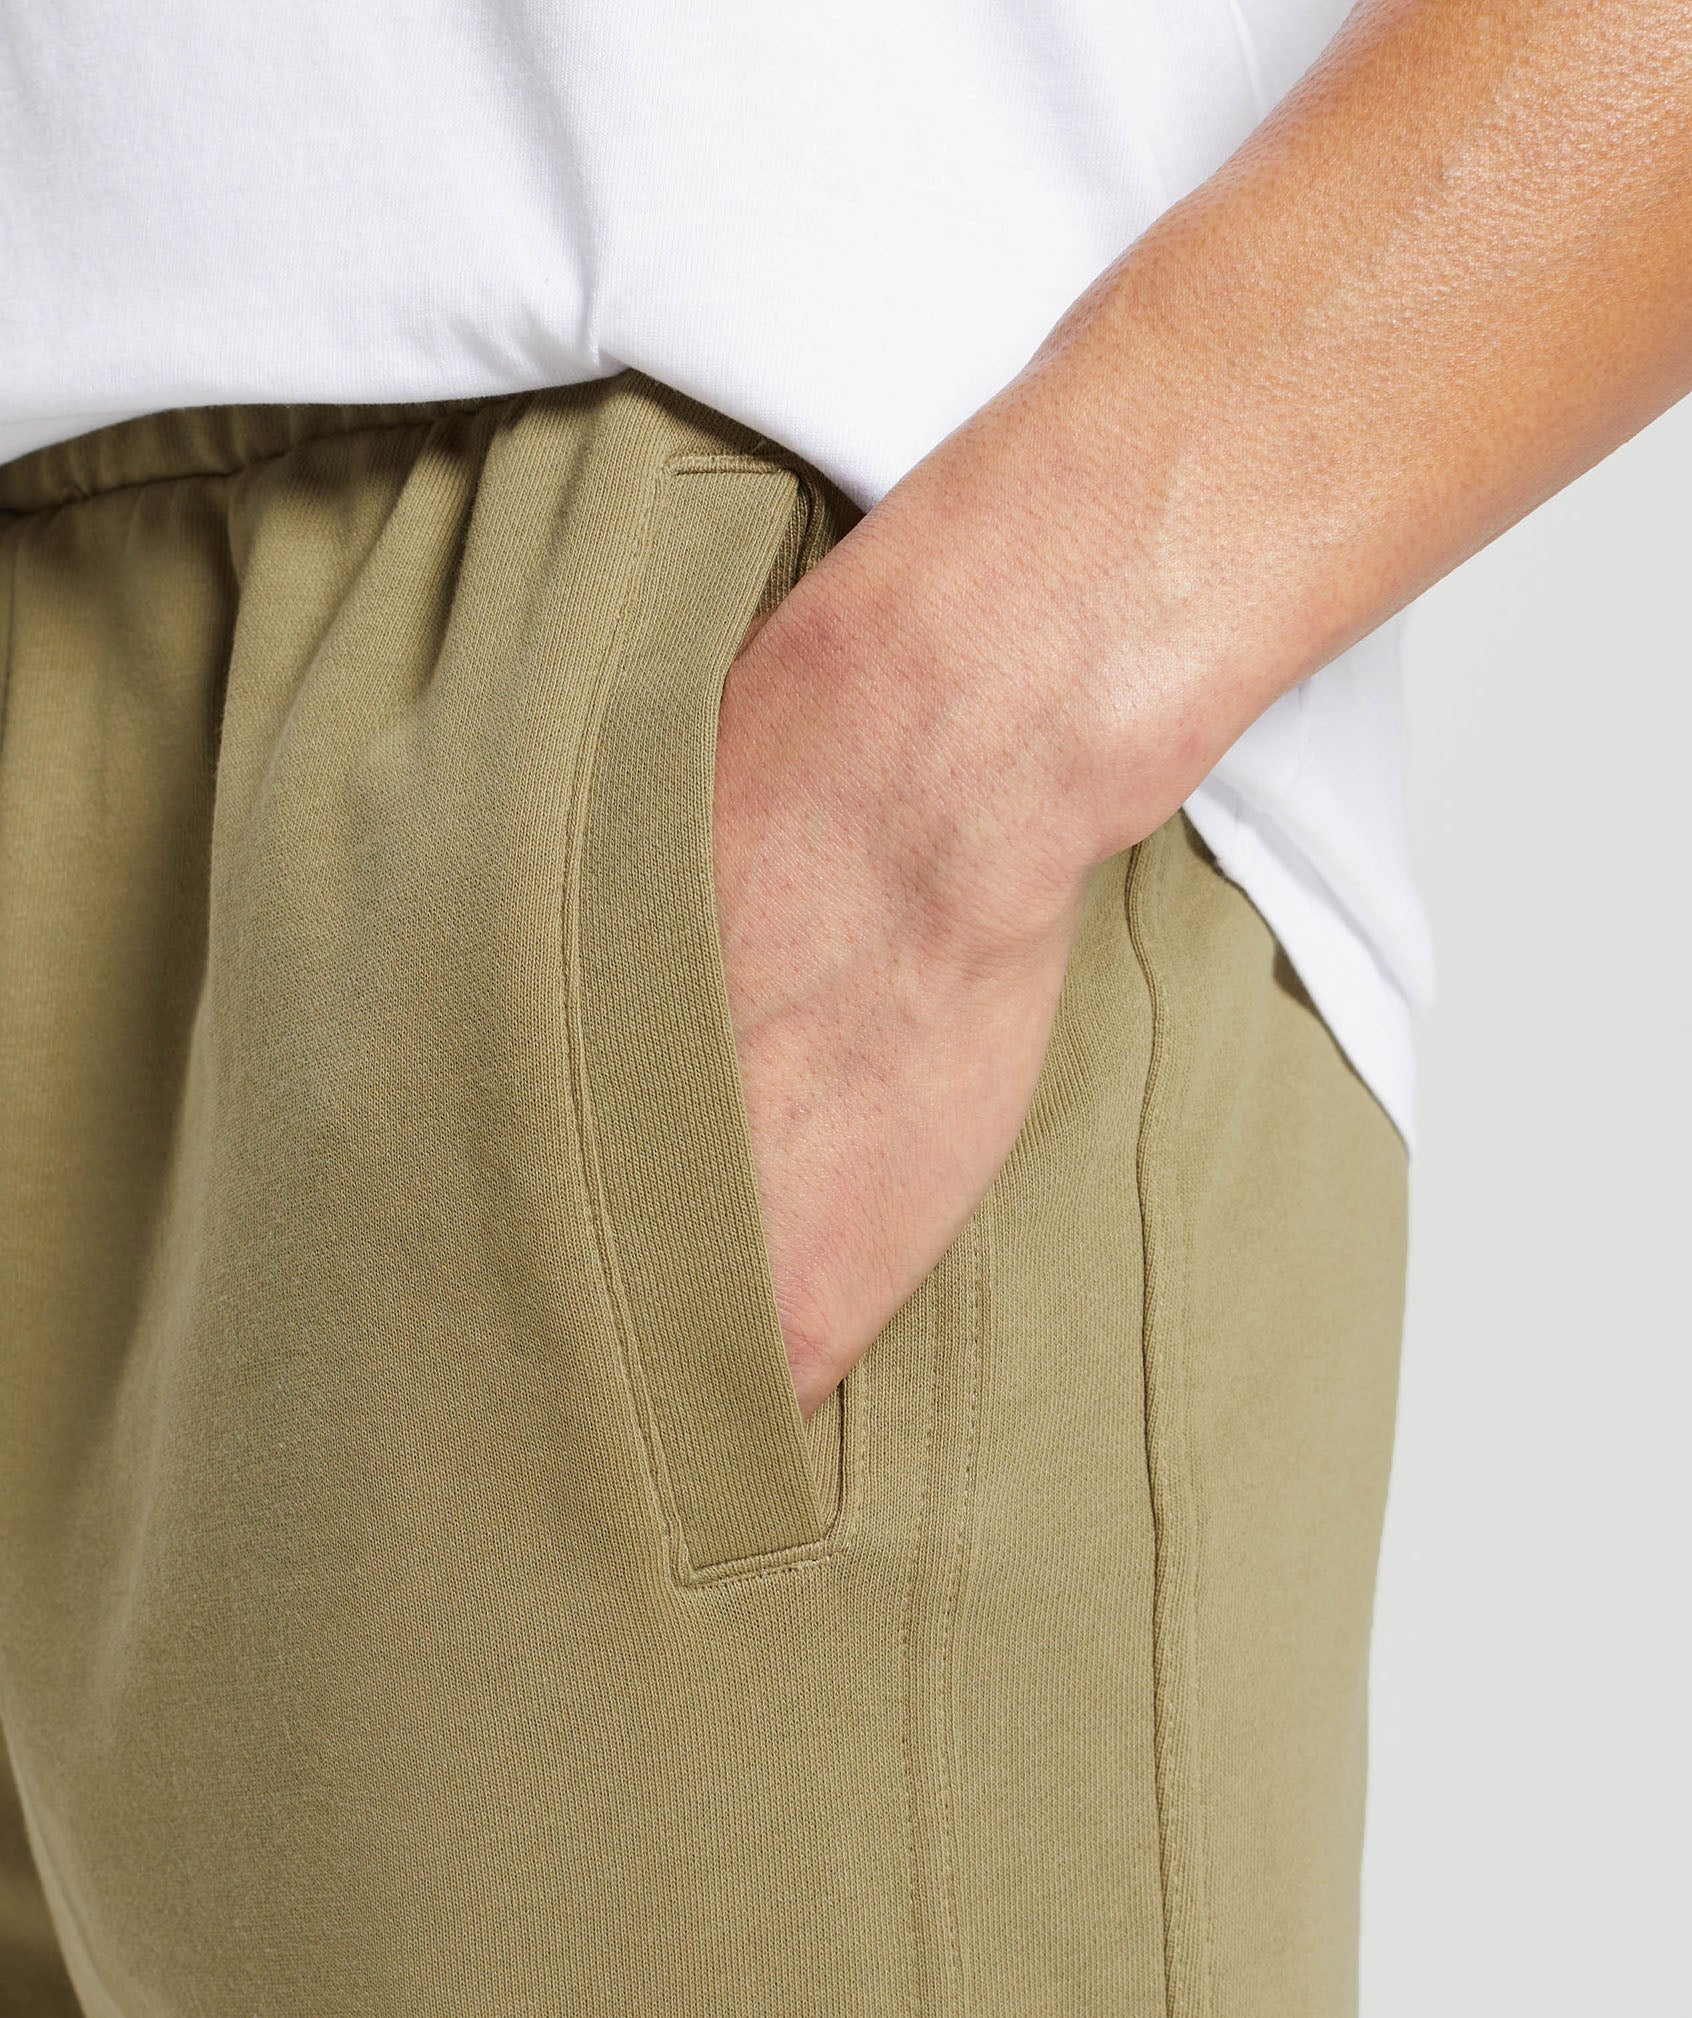 Rest Day Essentials Joggers in Troop Green - view 7